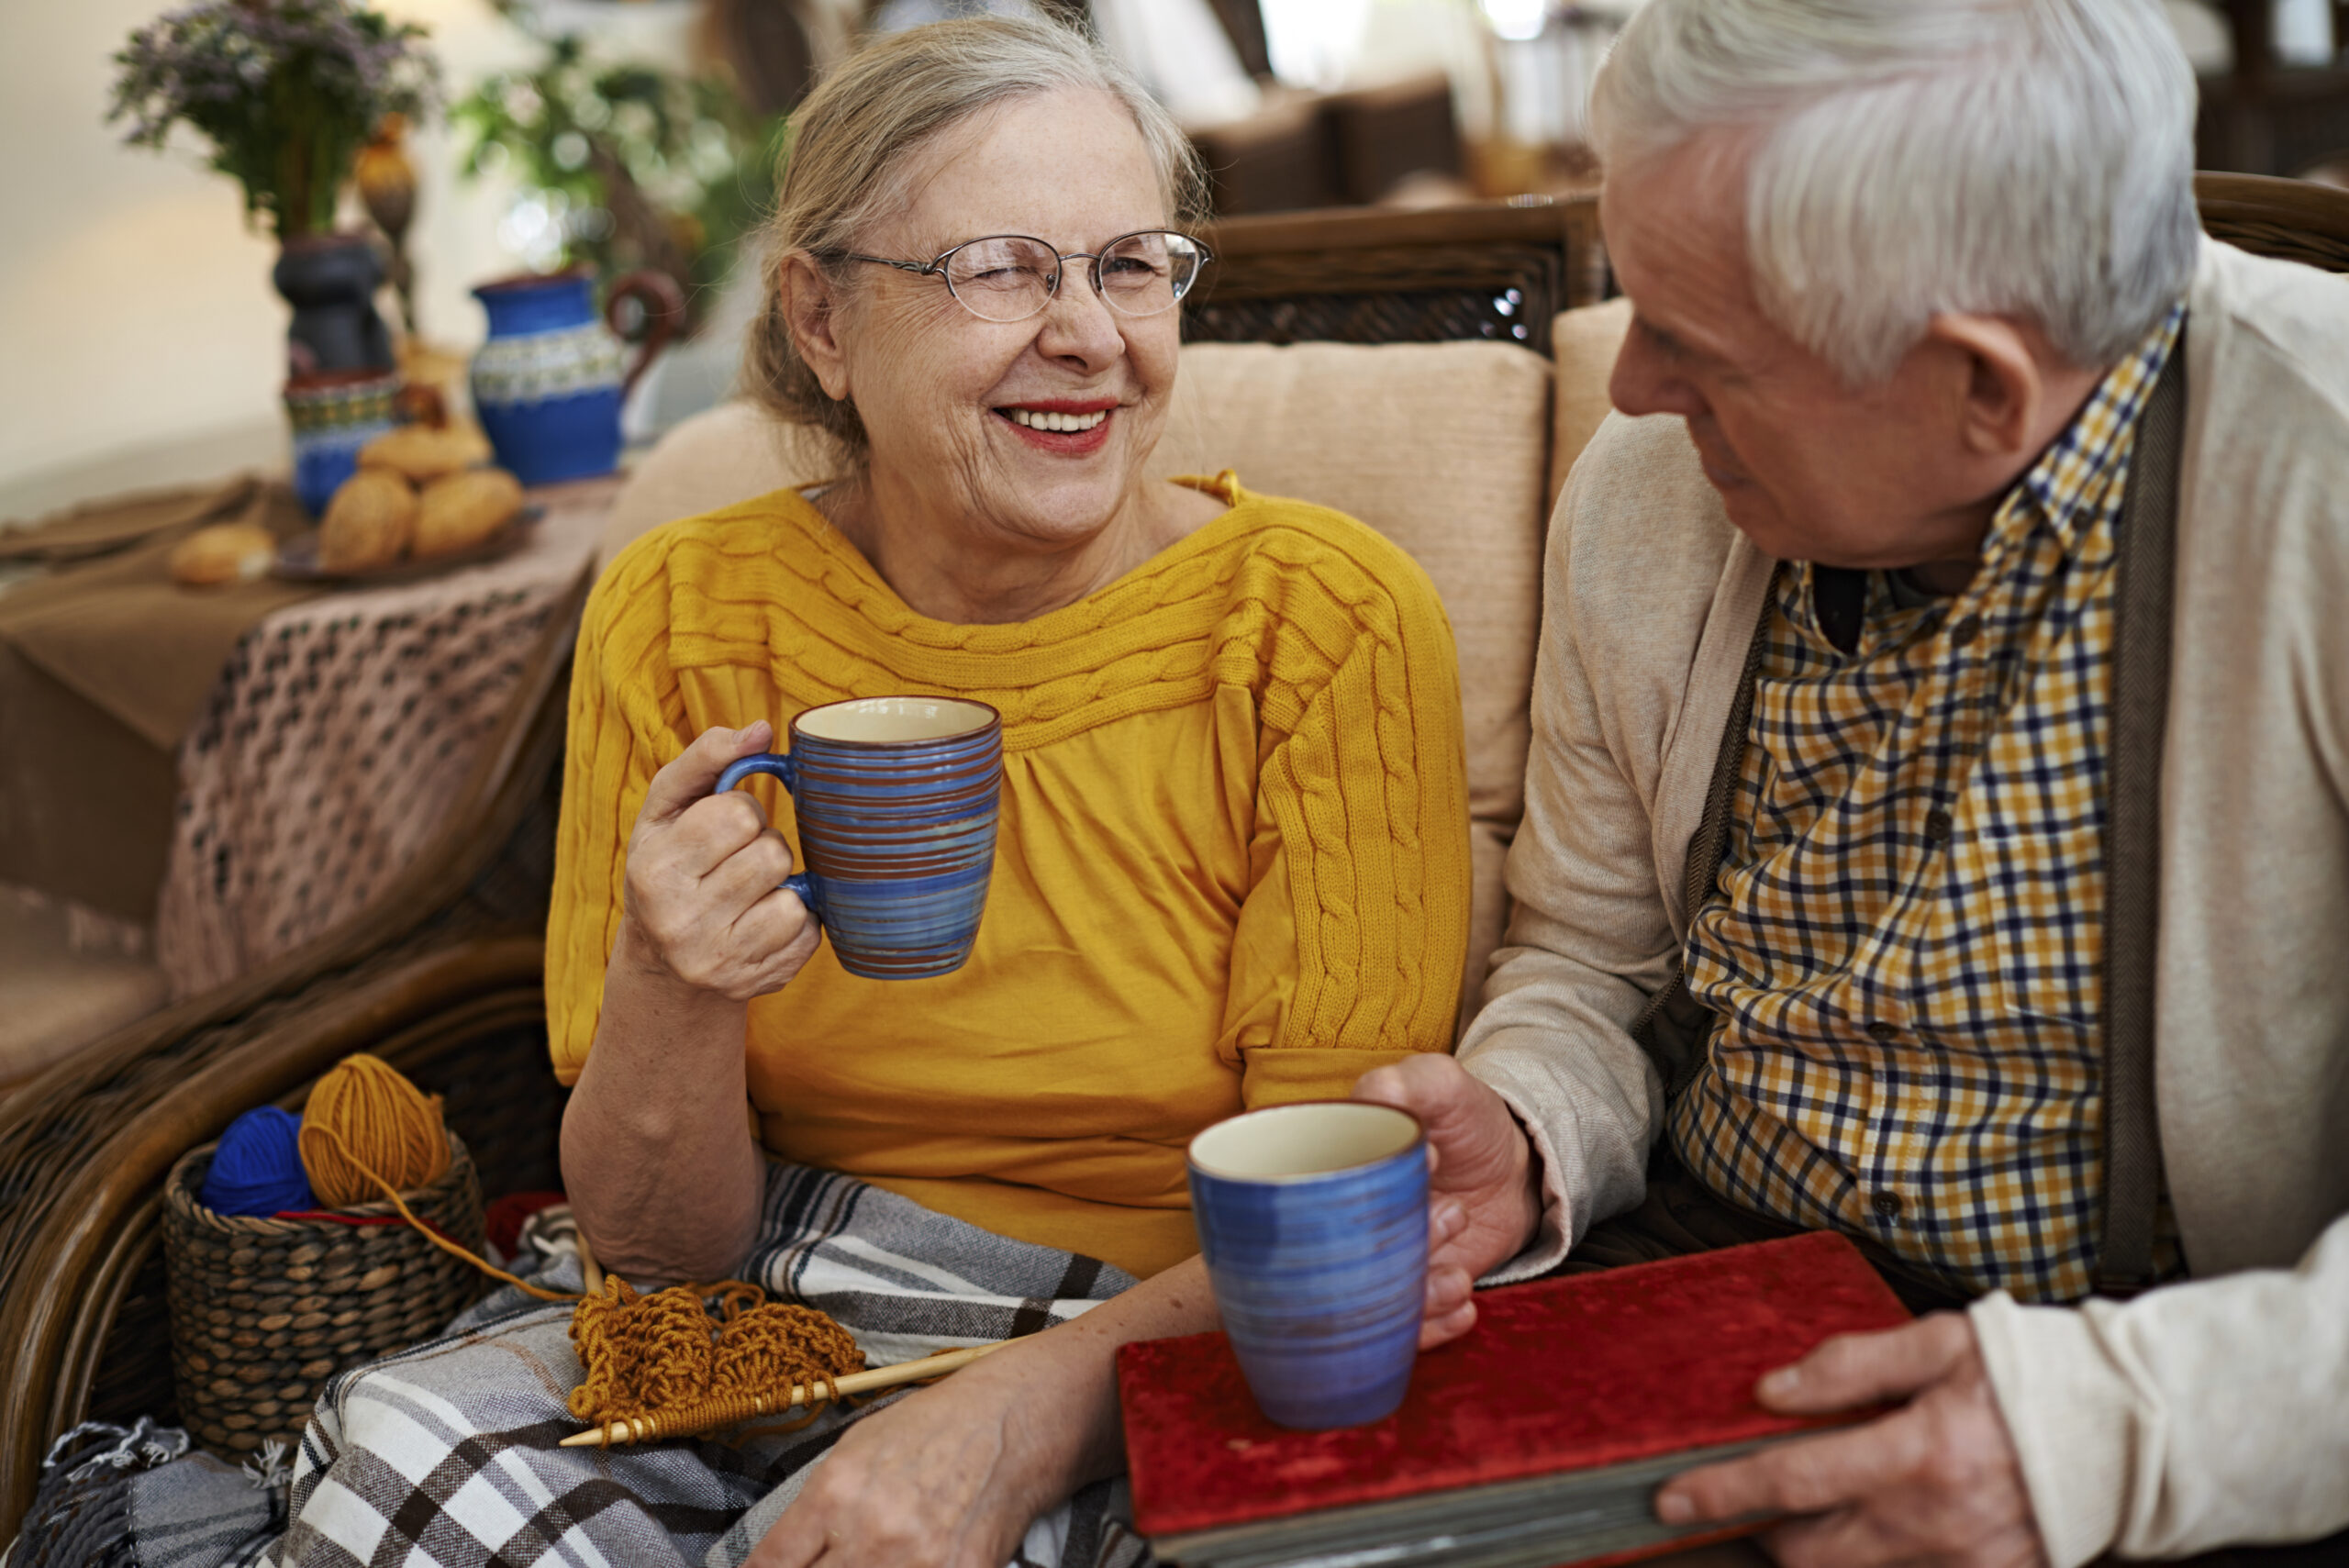 “A relaxed moment for a senior couple: enjoying hobbies, laughter, and companionship, showcasing how respite care can provide both care and a break for loved ones.”